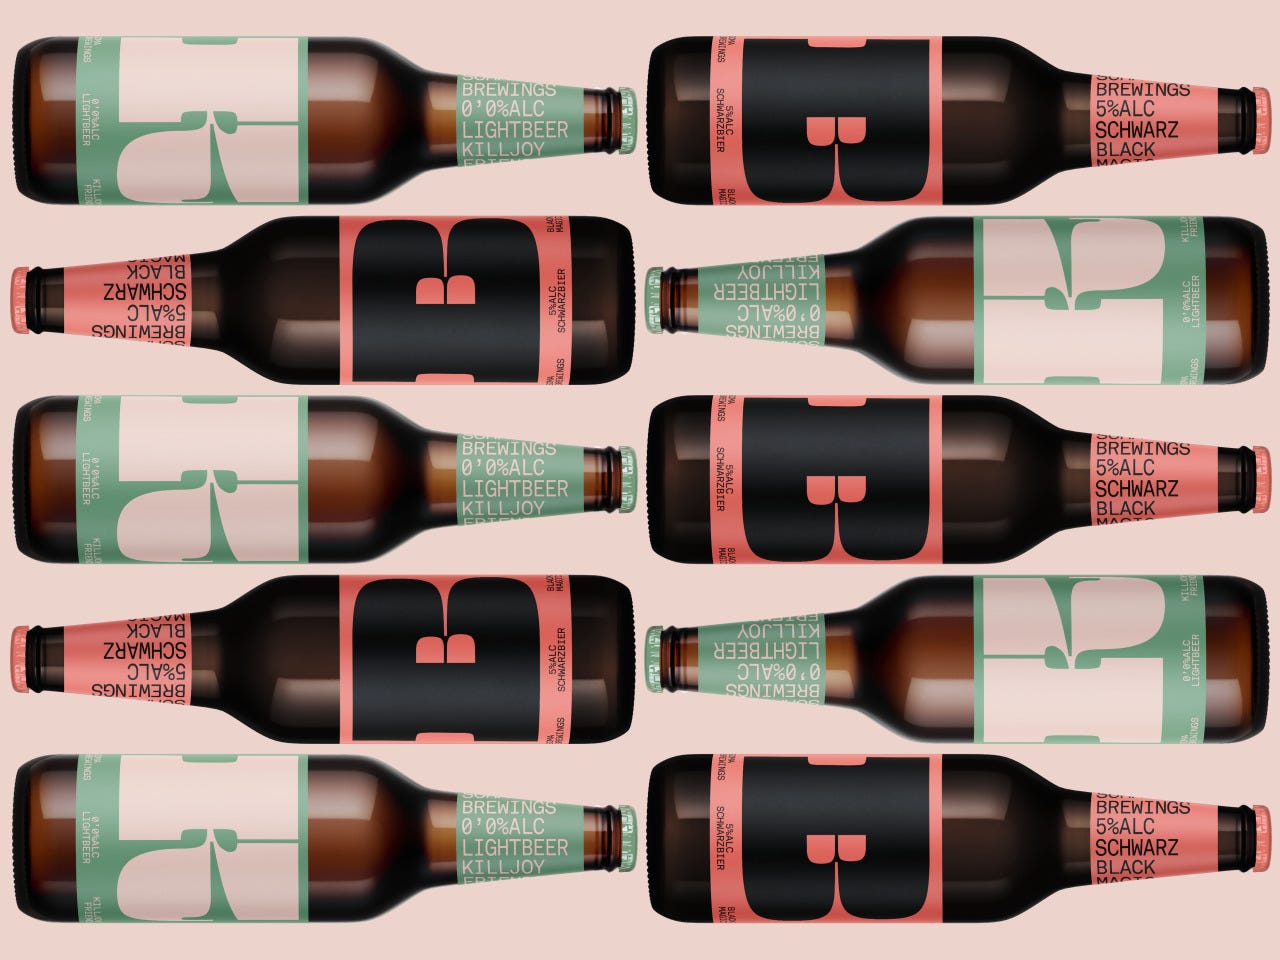 SOMA Beers Barcelona brewing co by Quim Marin Studio www.quimmarin.com